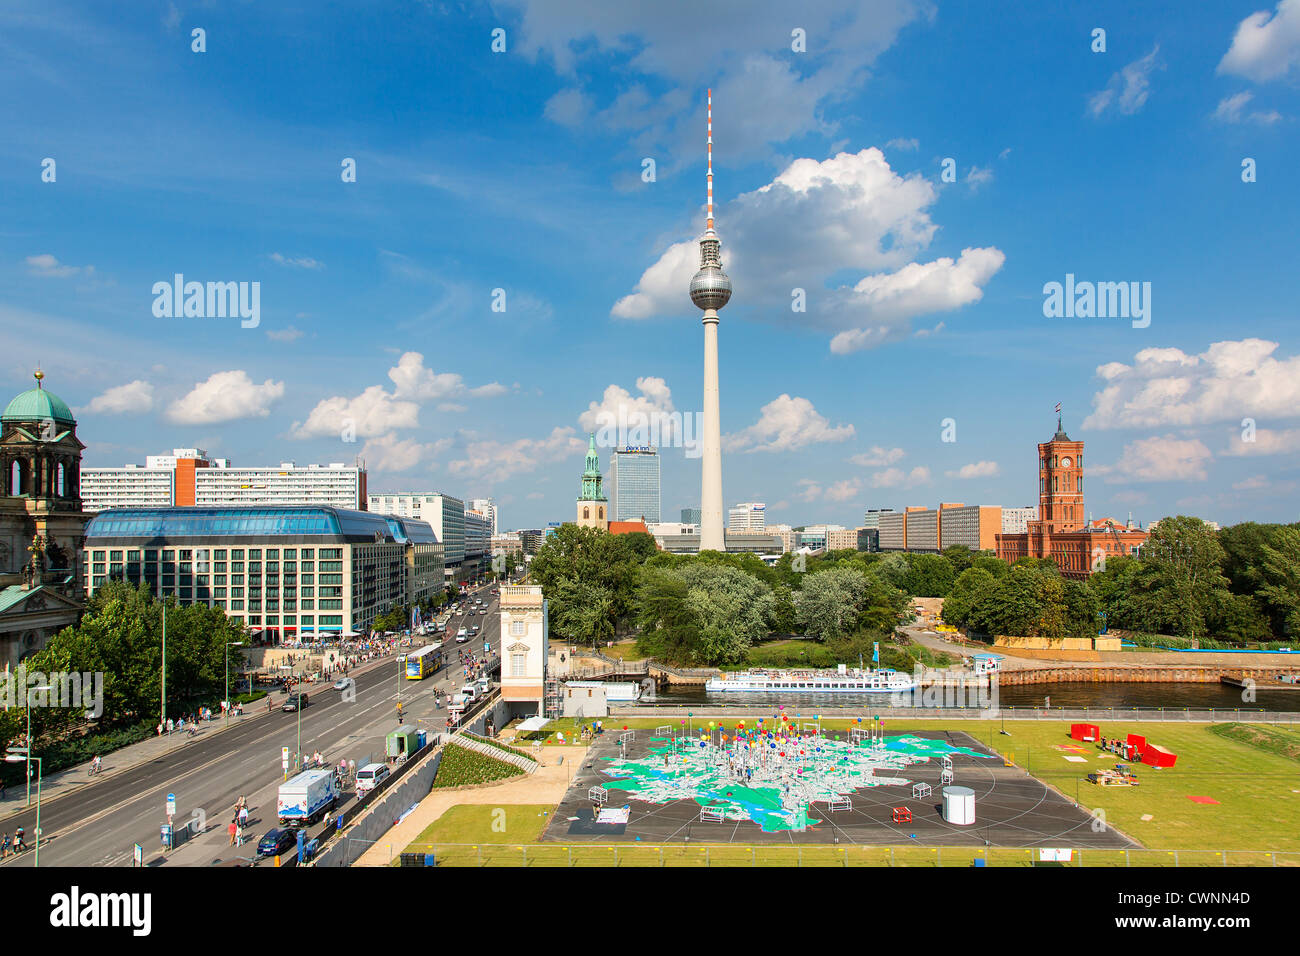 Europe, Germany, Fernsehturm, Television Tower, Berlin. Stock Photo